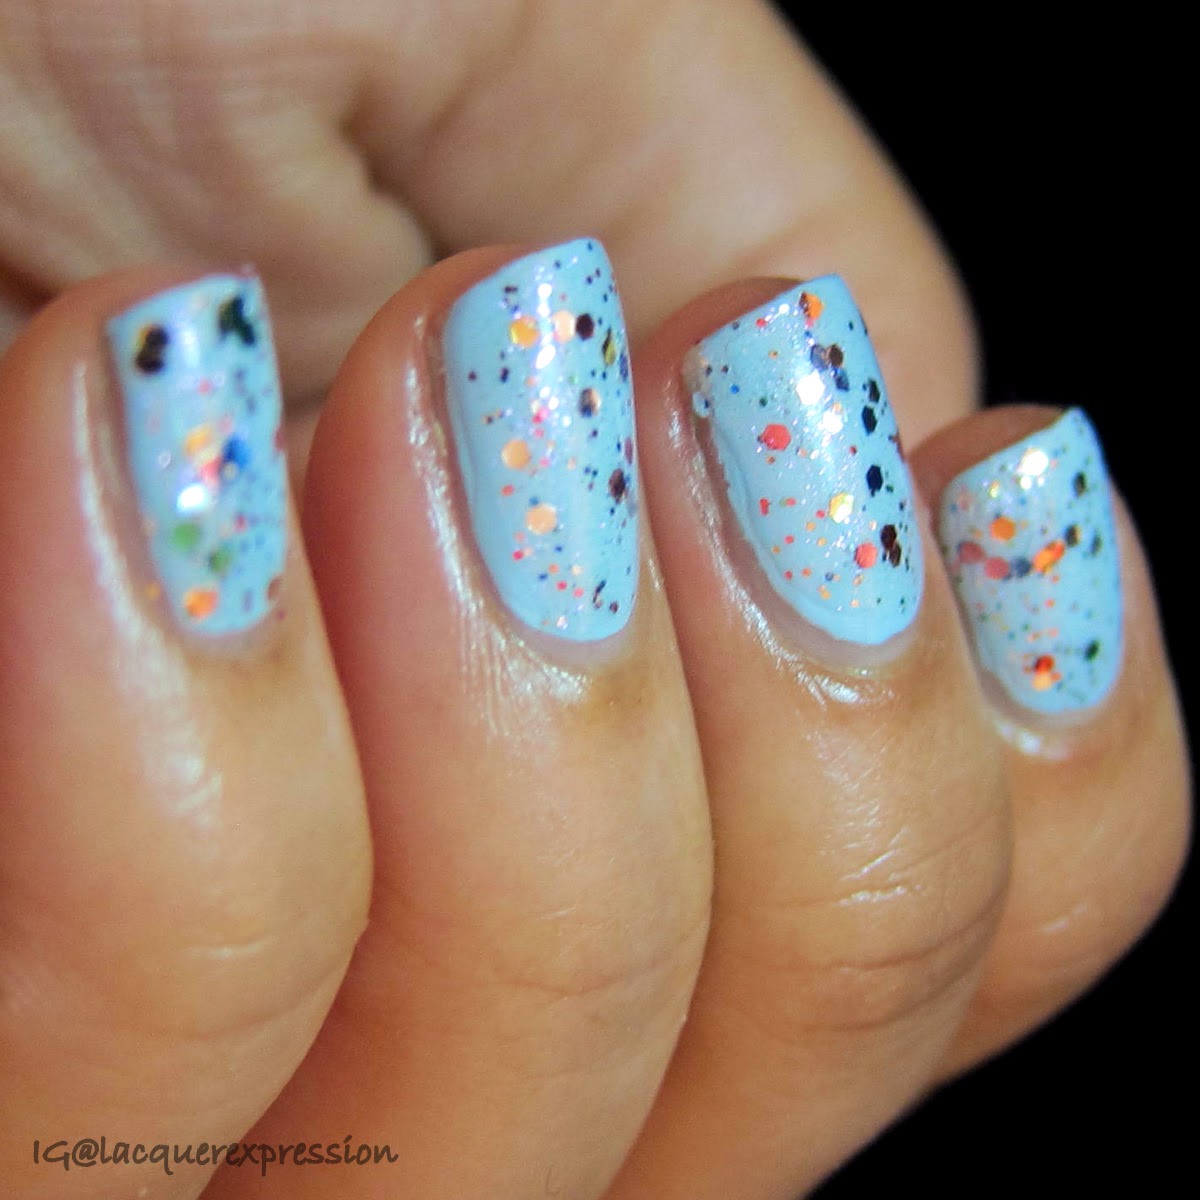 swatch of glitterbomb nail polish by orly